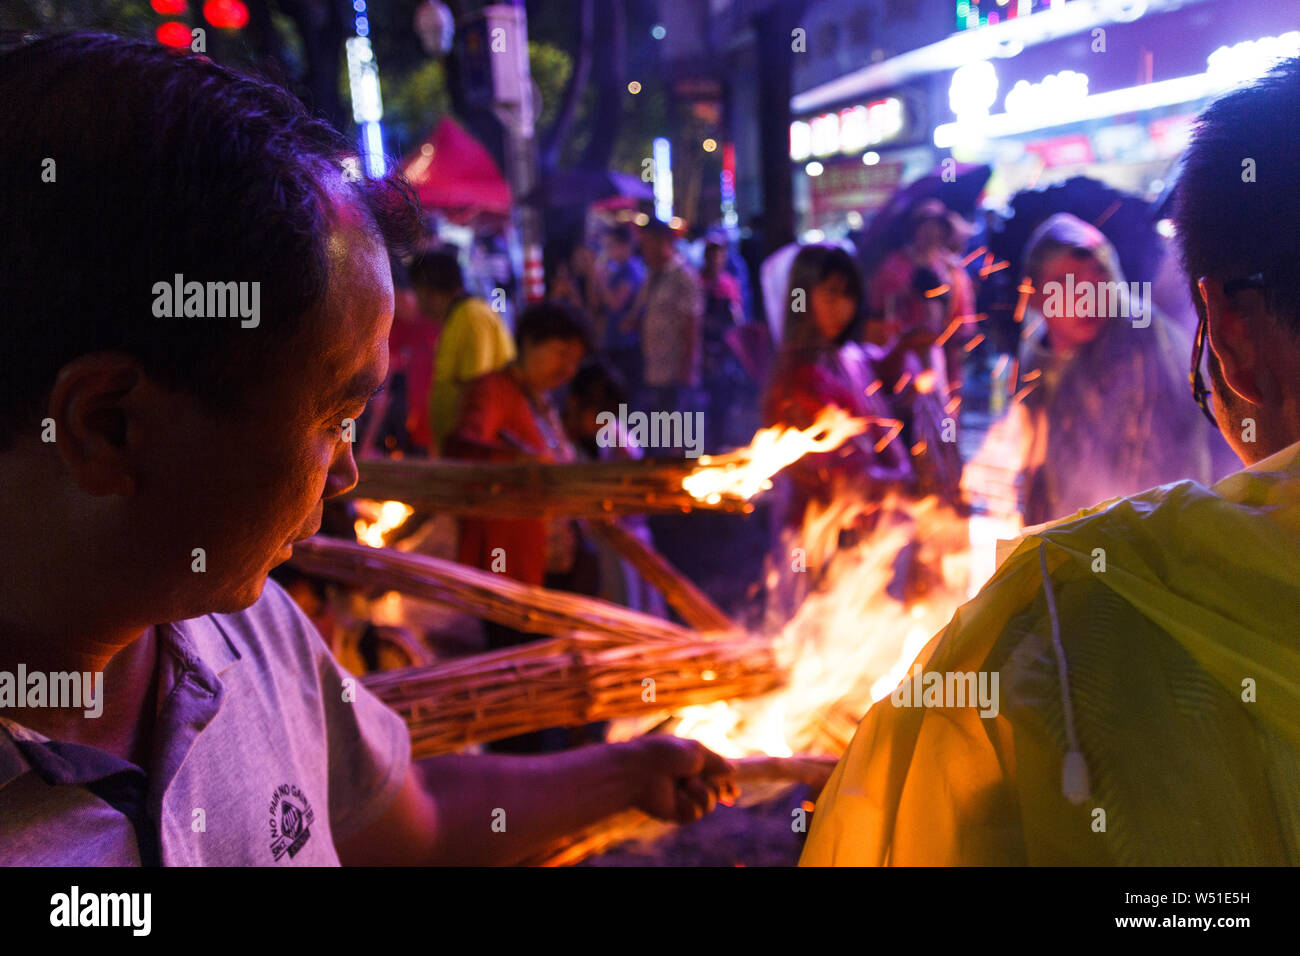 Celebrations of the torch festival in Yunnan province, China Stock Photo